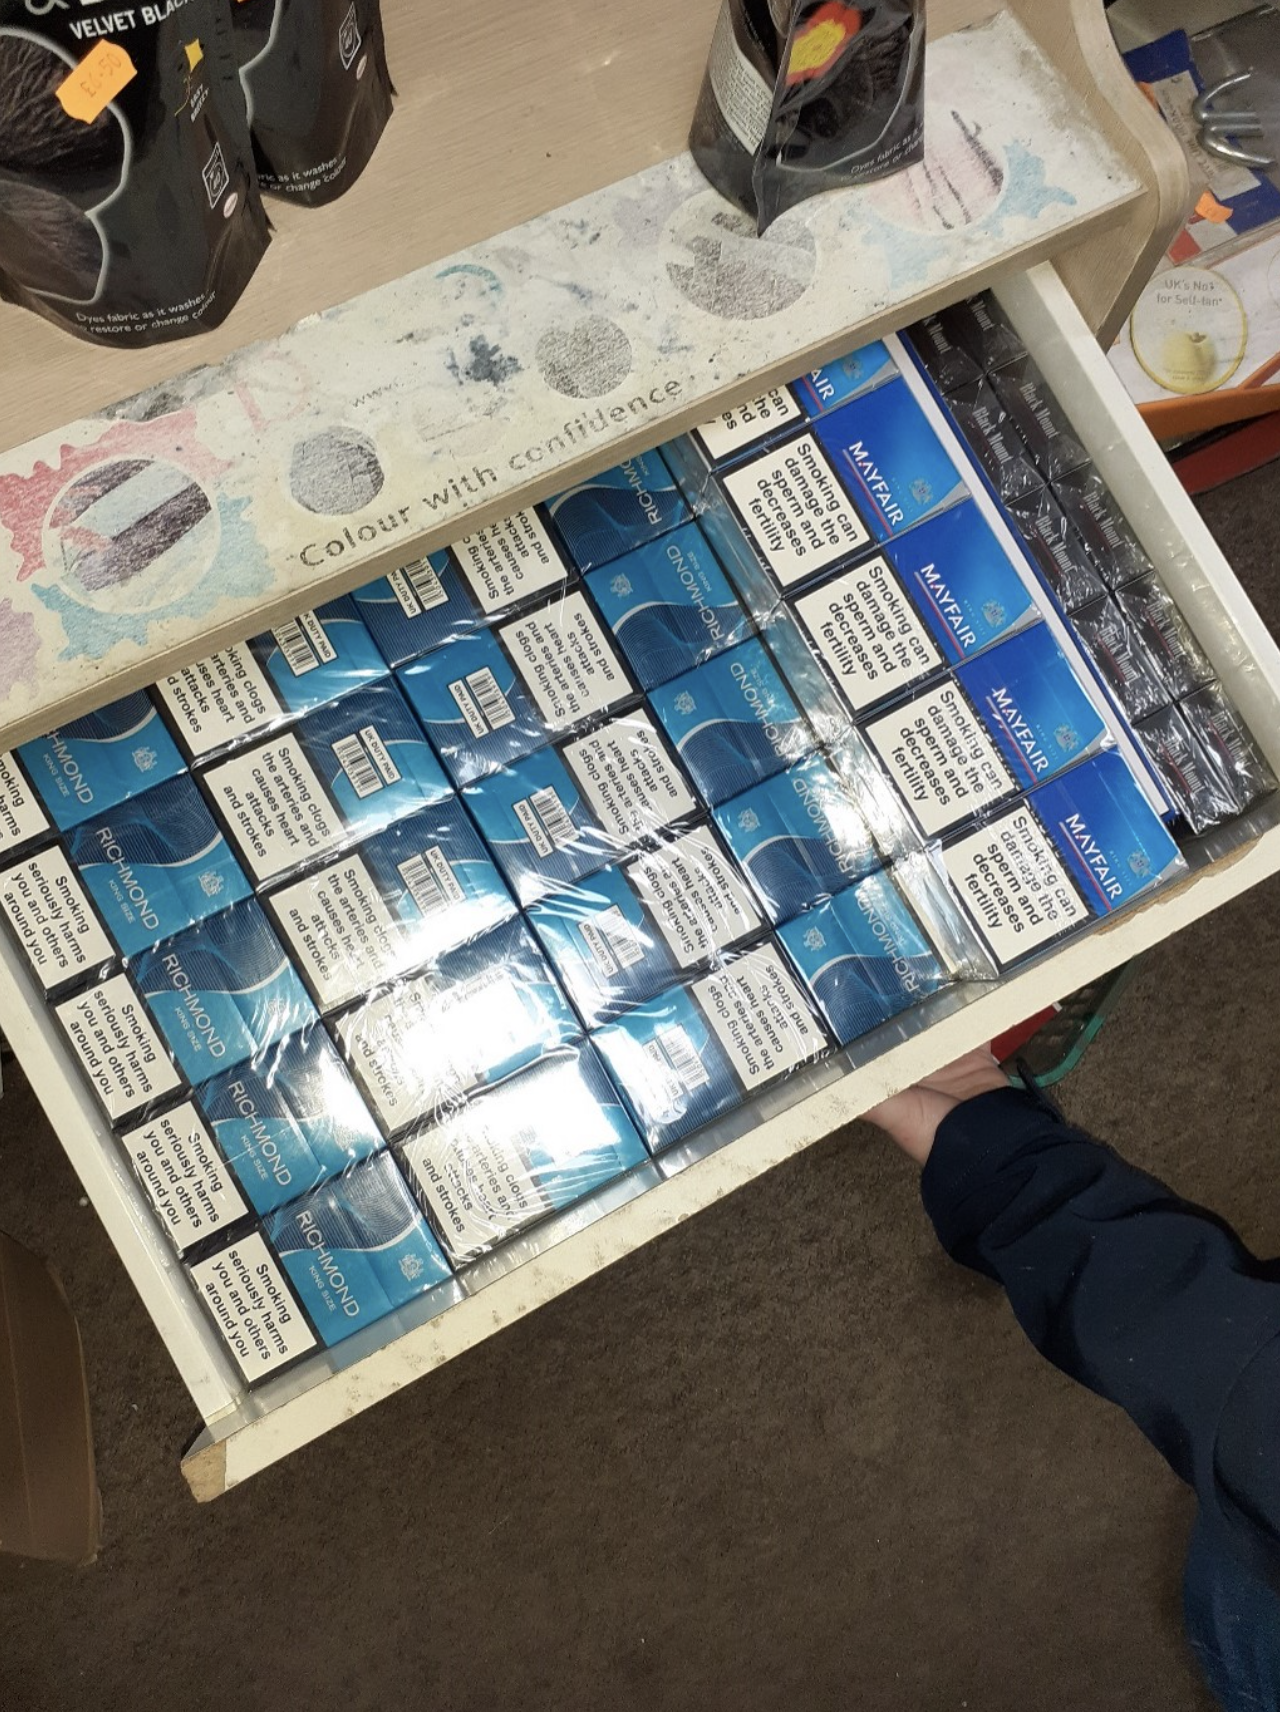 Image of packs of cigarettes stacked inside an open drawer.